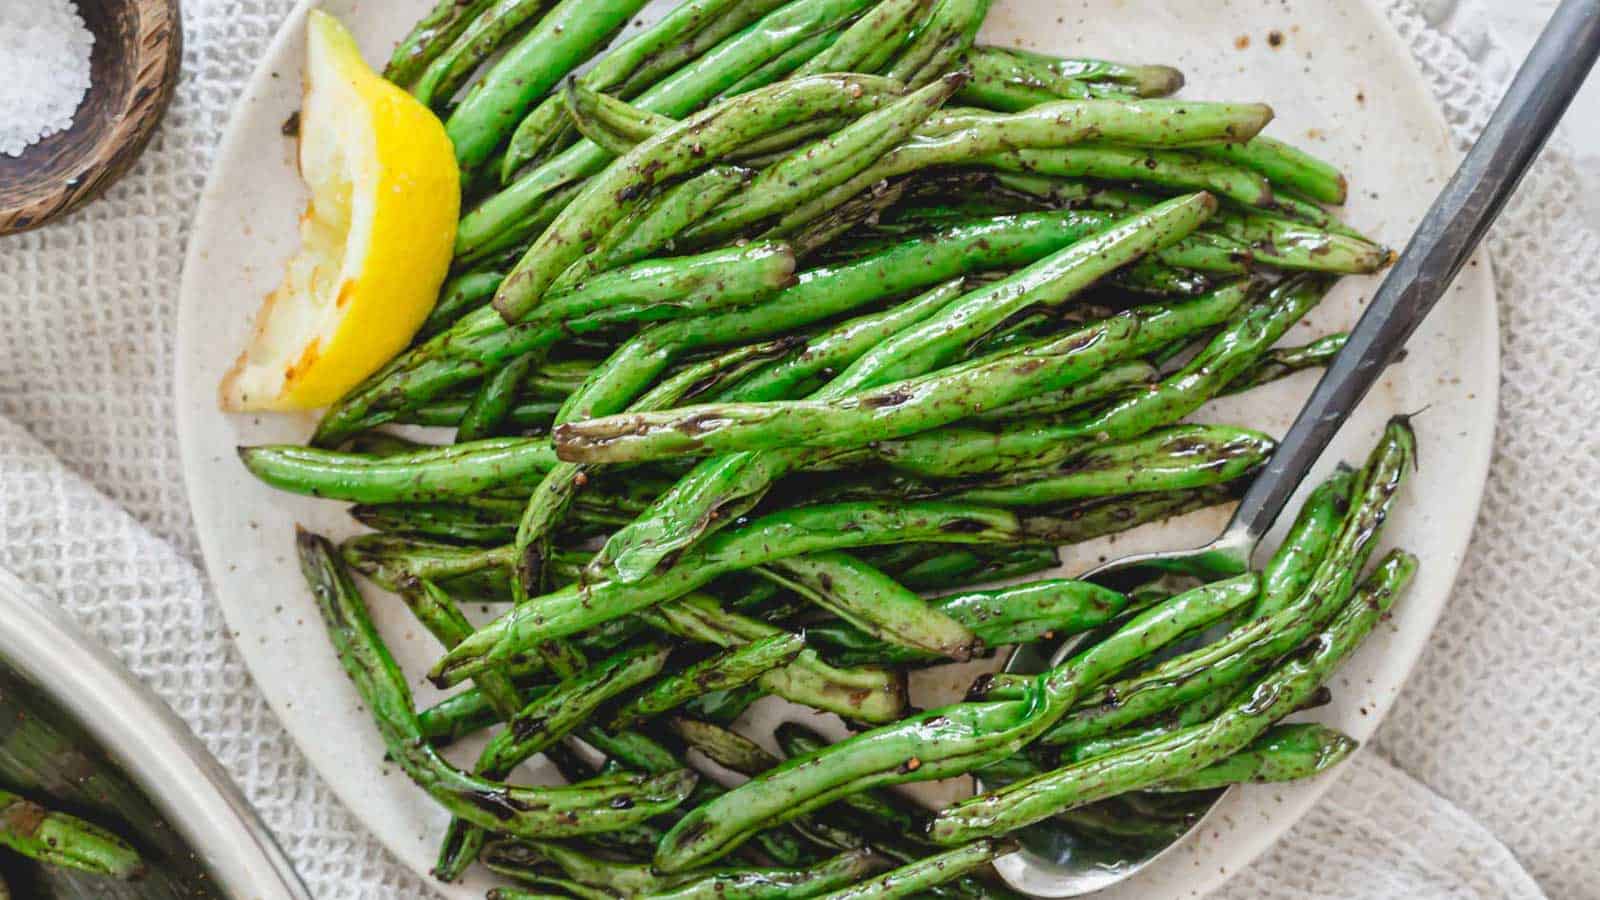 Grilled Asian green beans on a plate with a lemon wedge.